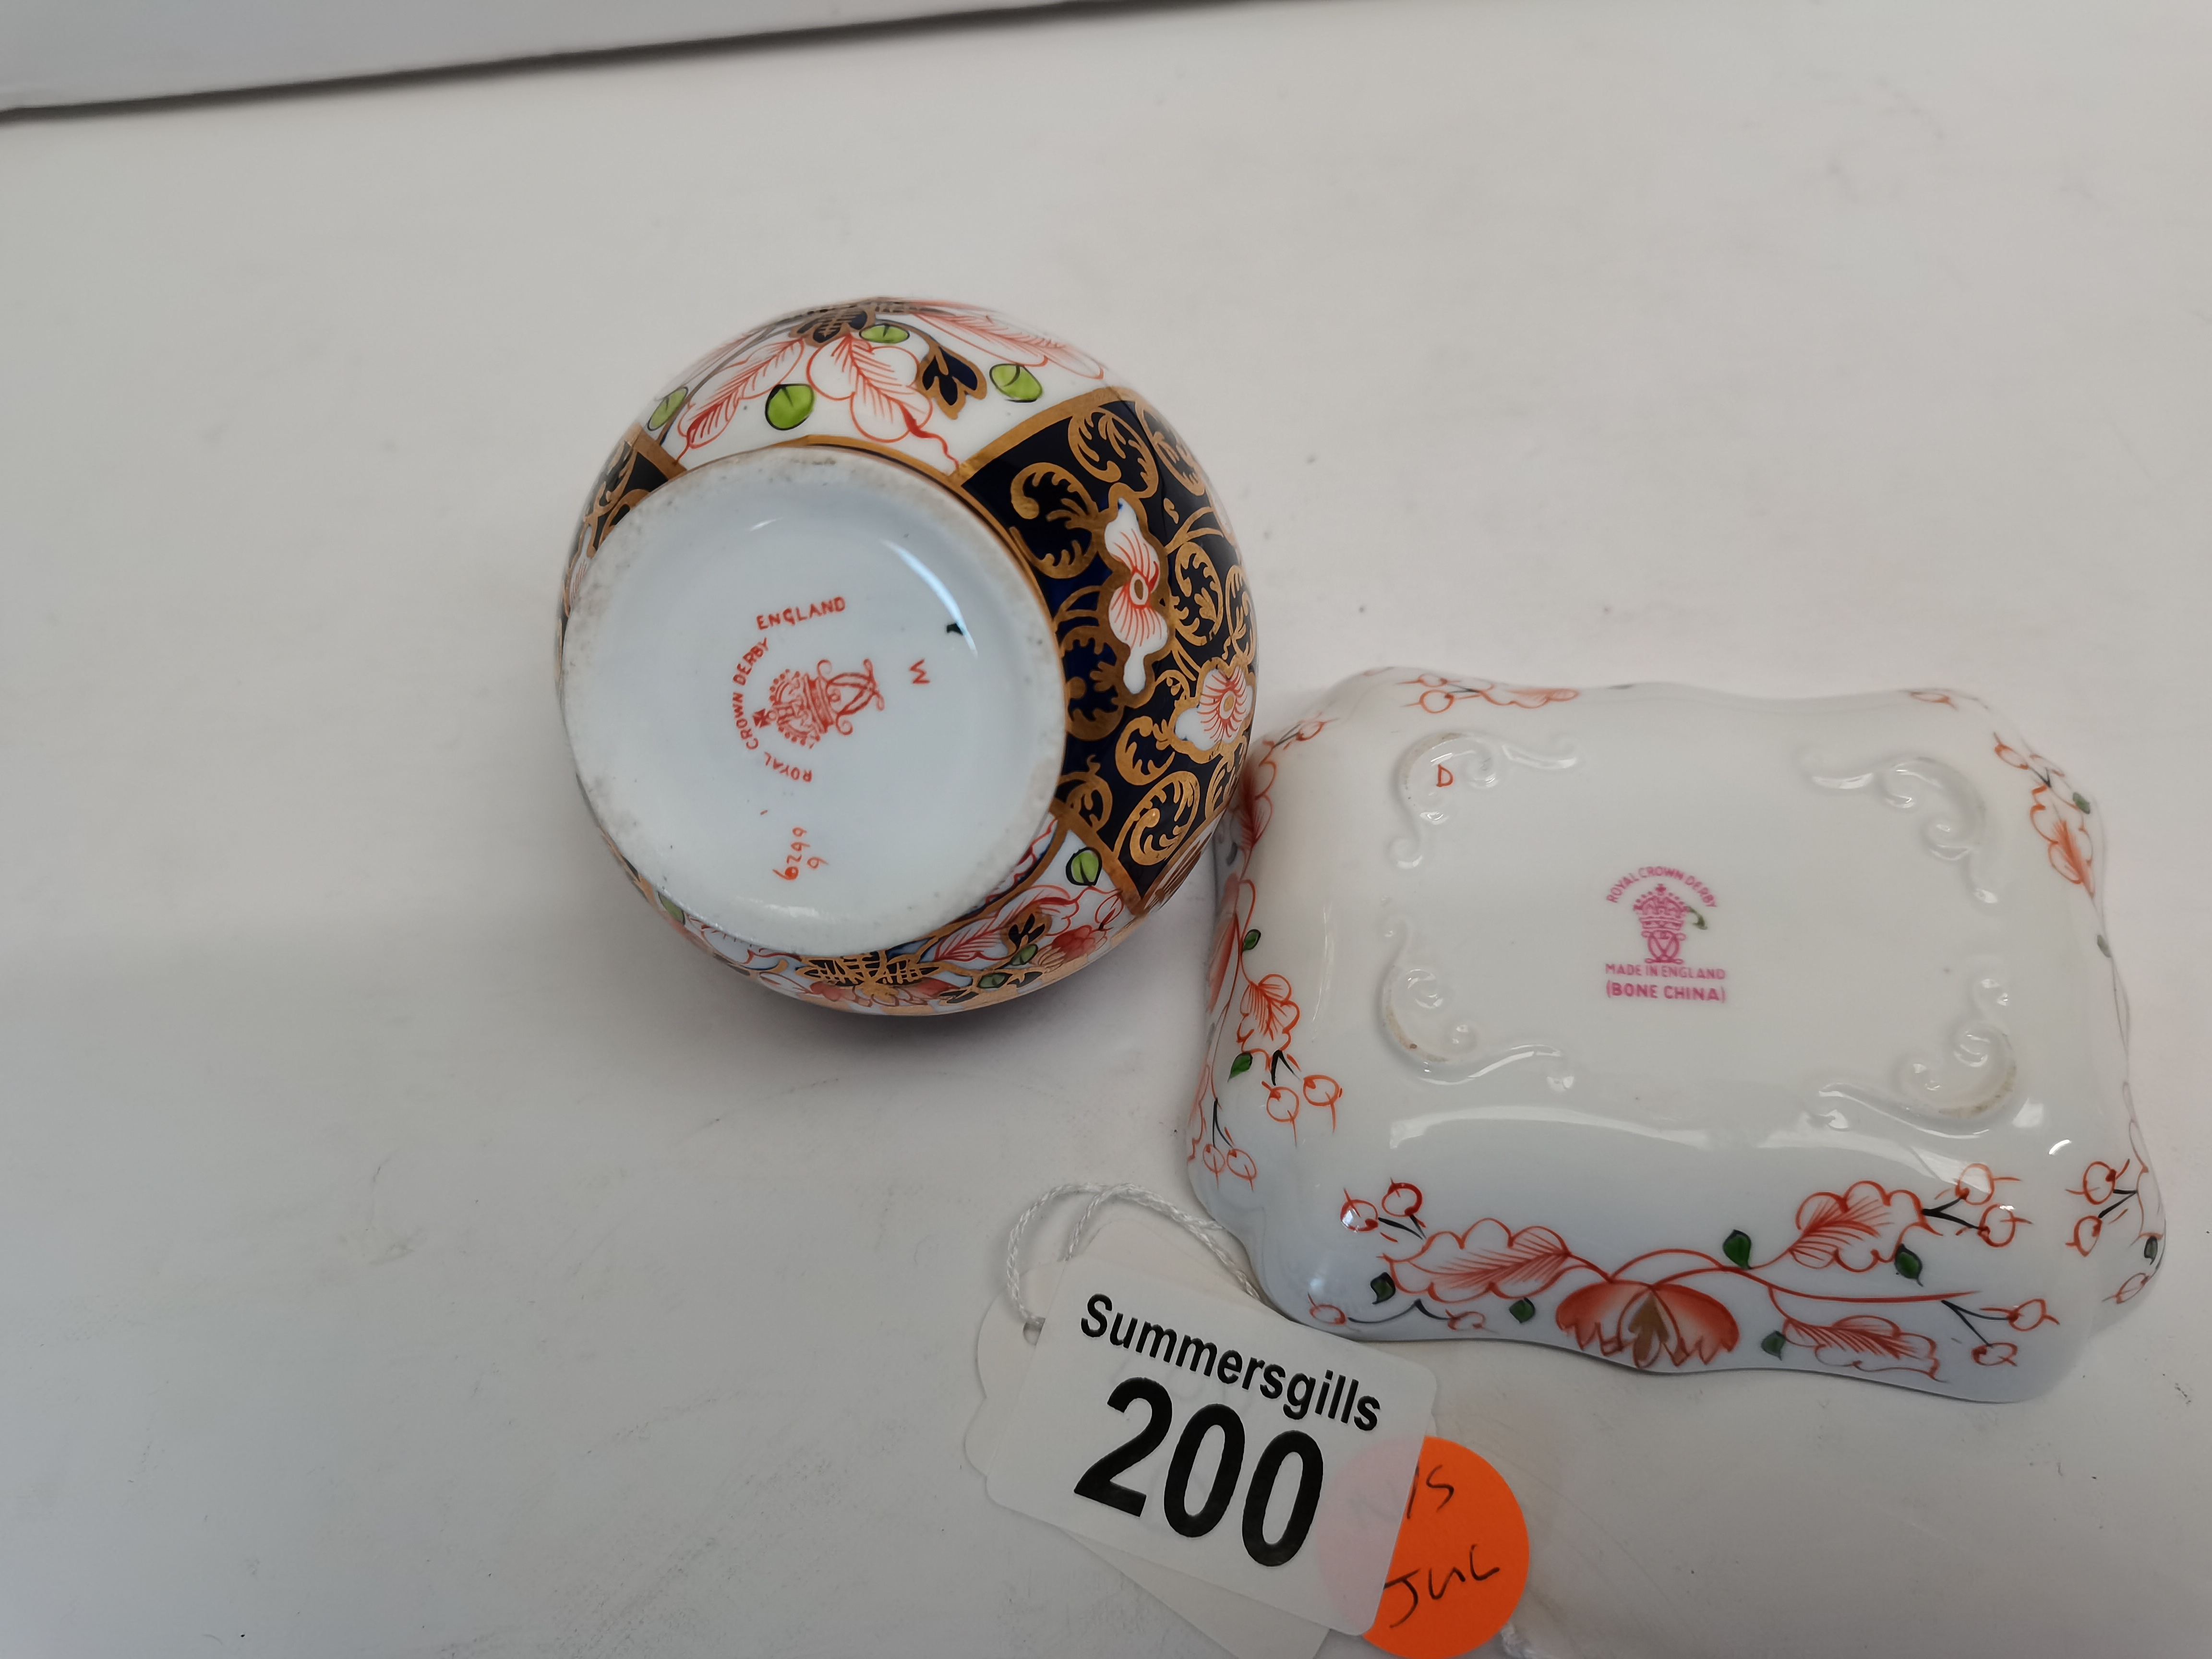 Royal Crown Derby Imari 1128 dish and Miniture Coal scuttle - Image 2 of 2